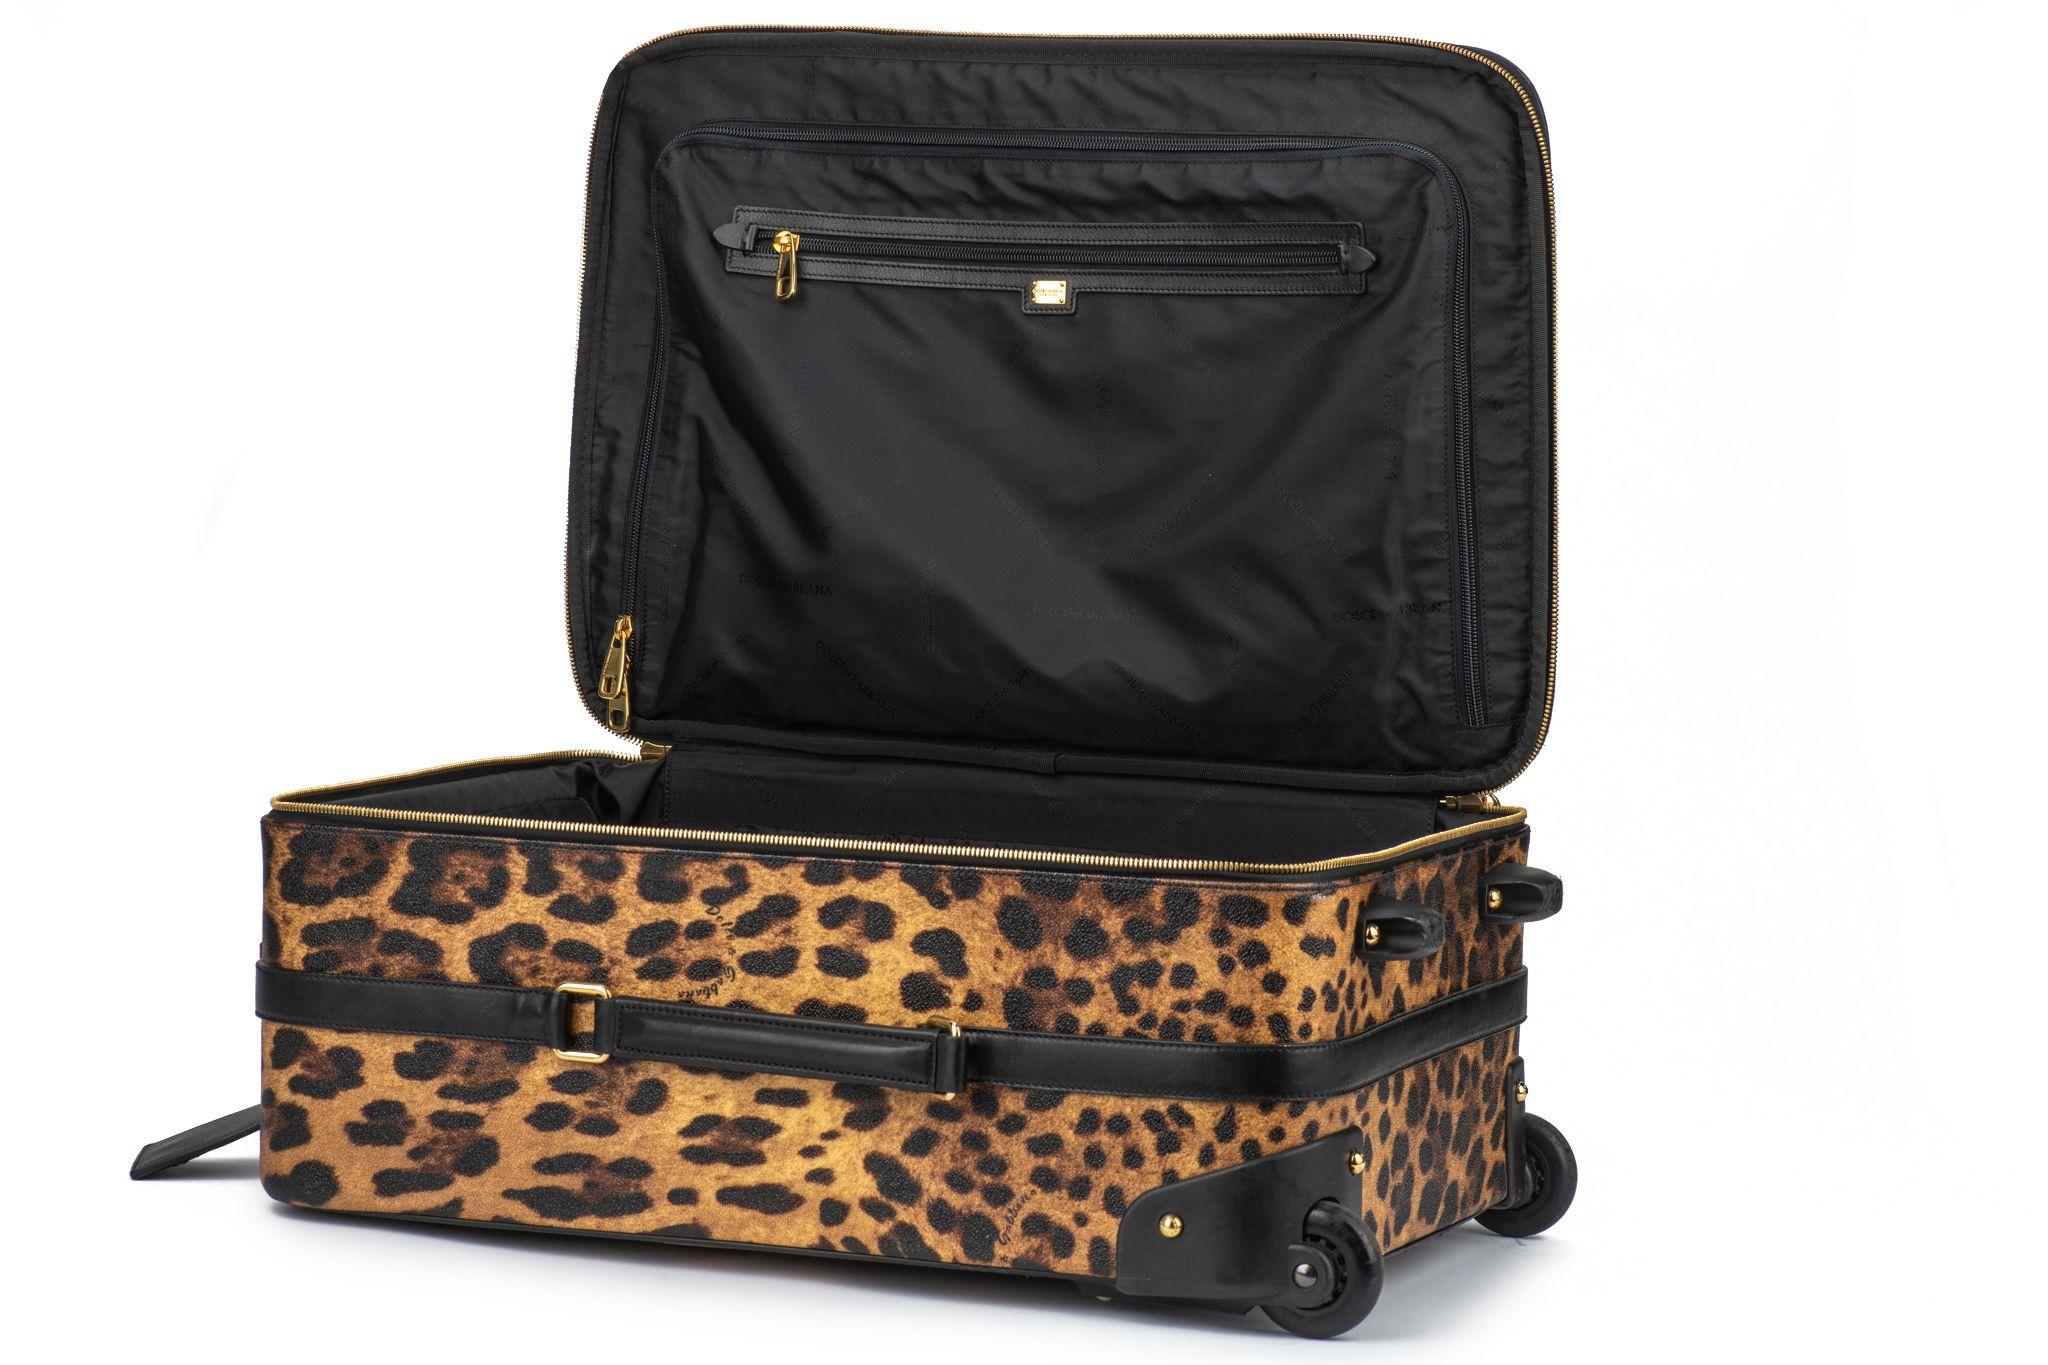 Women's or Men's Dolce Cheetah Print Carry On Luggage For Sale